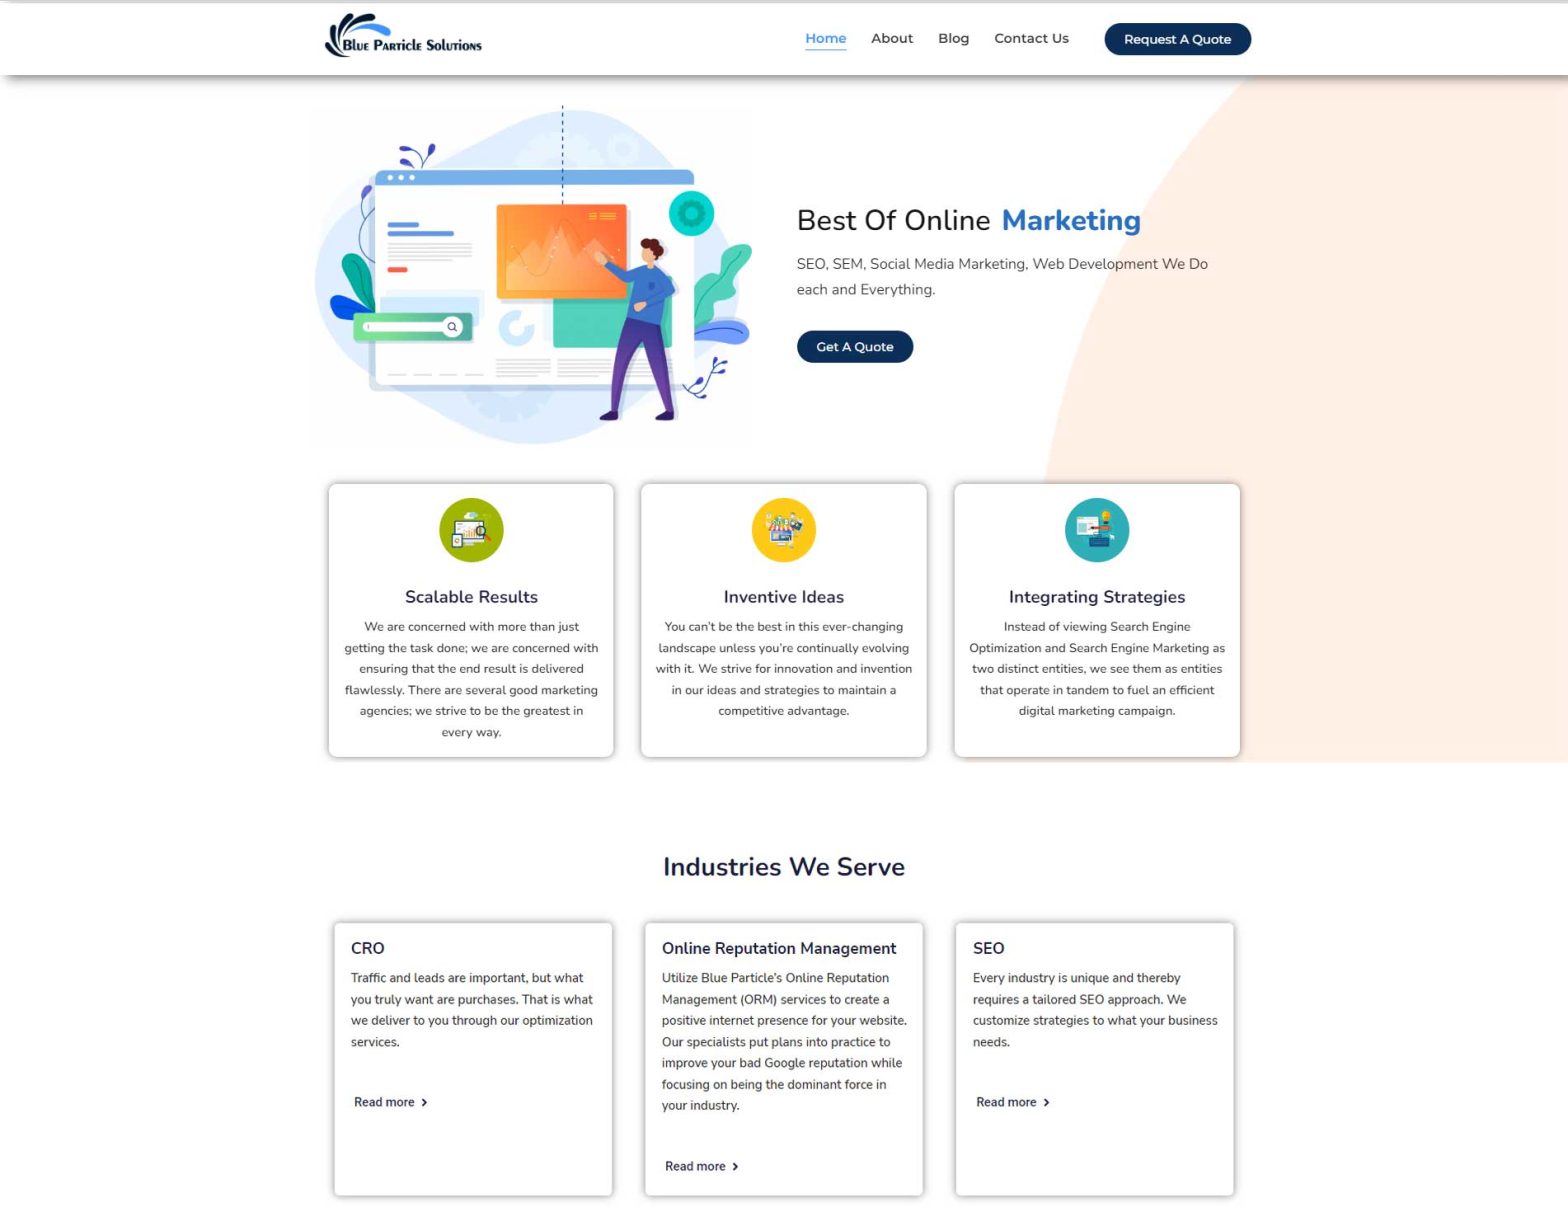 Designing and developing a website for a cutting-edge digital marketing agency: Blue Particle Solutions